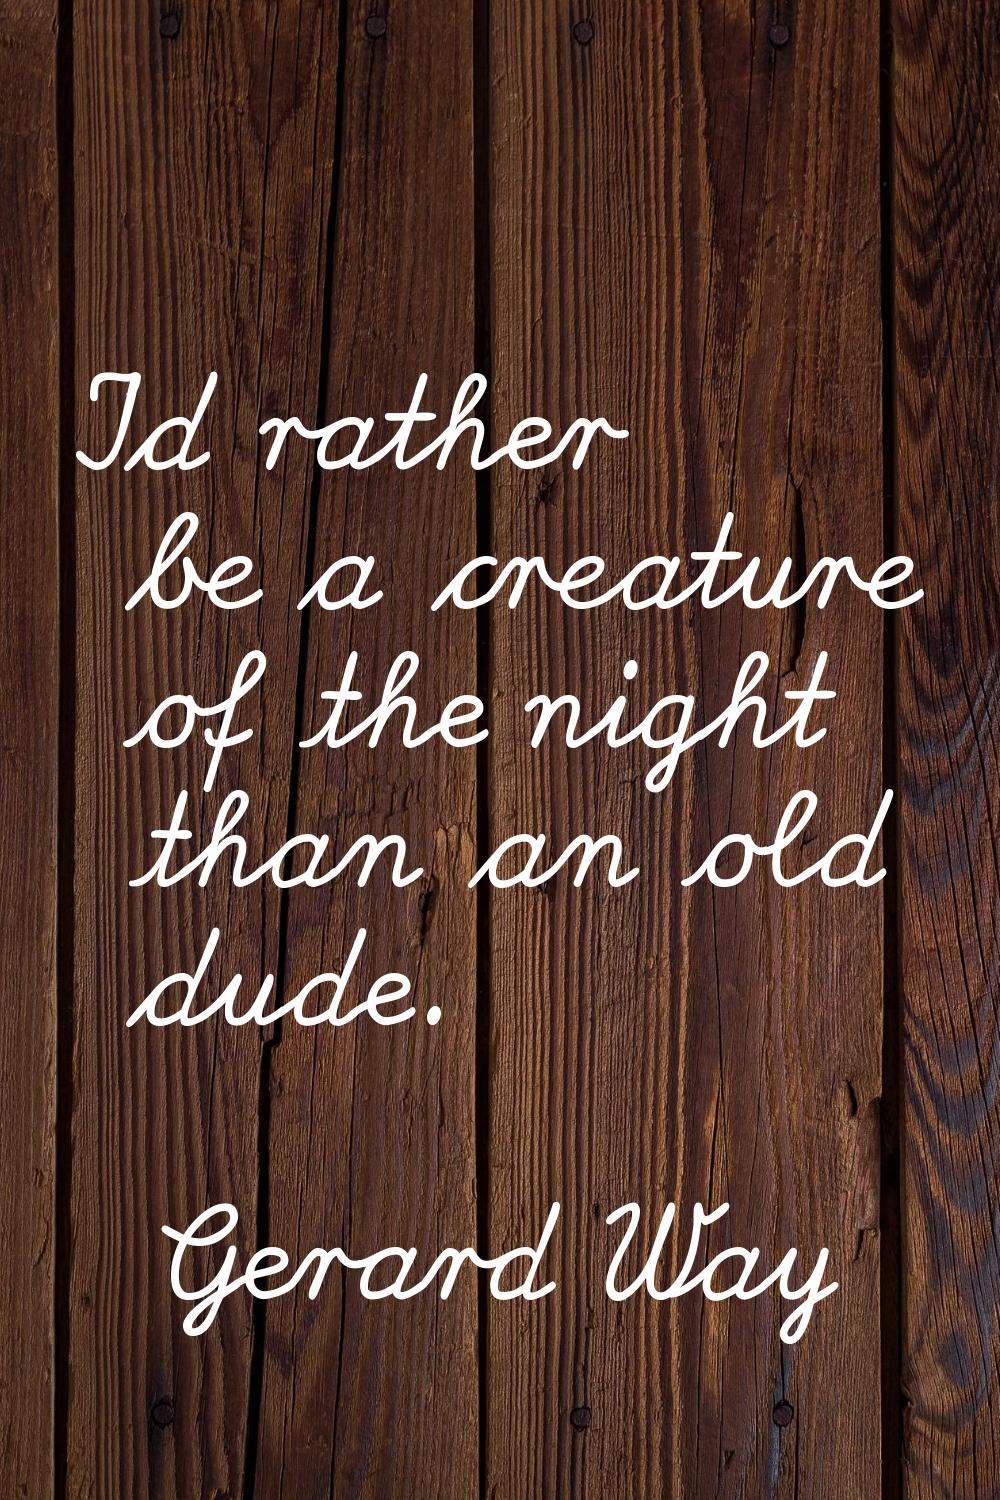 I'd rather be a creature of the night than an old dude.